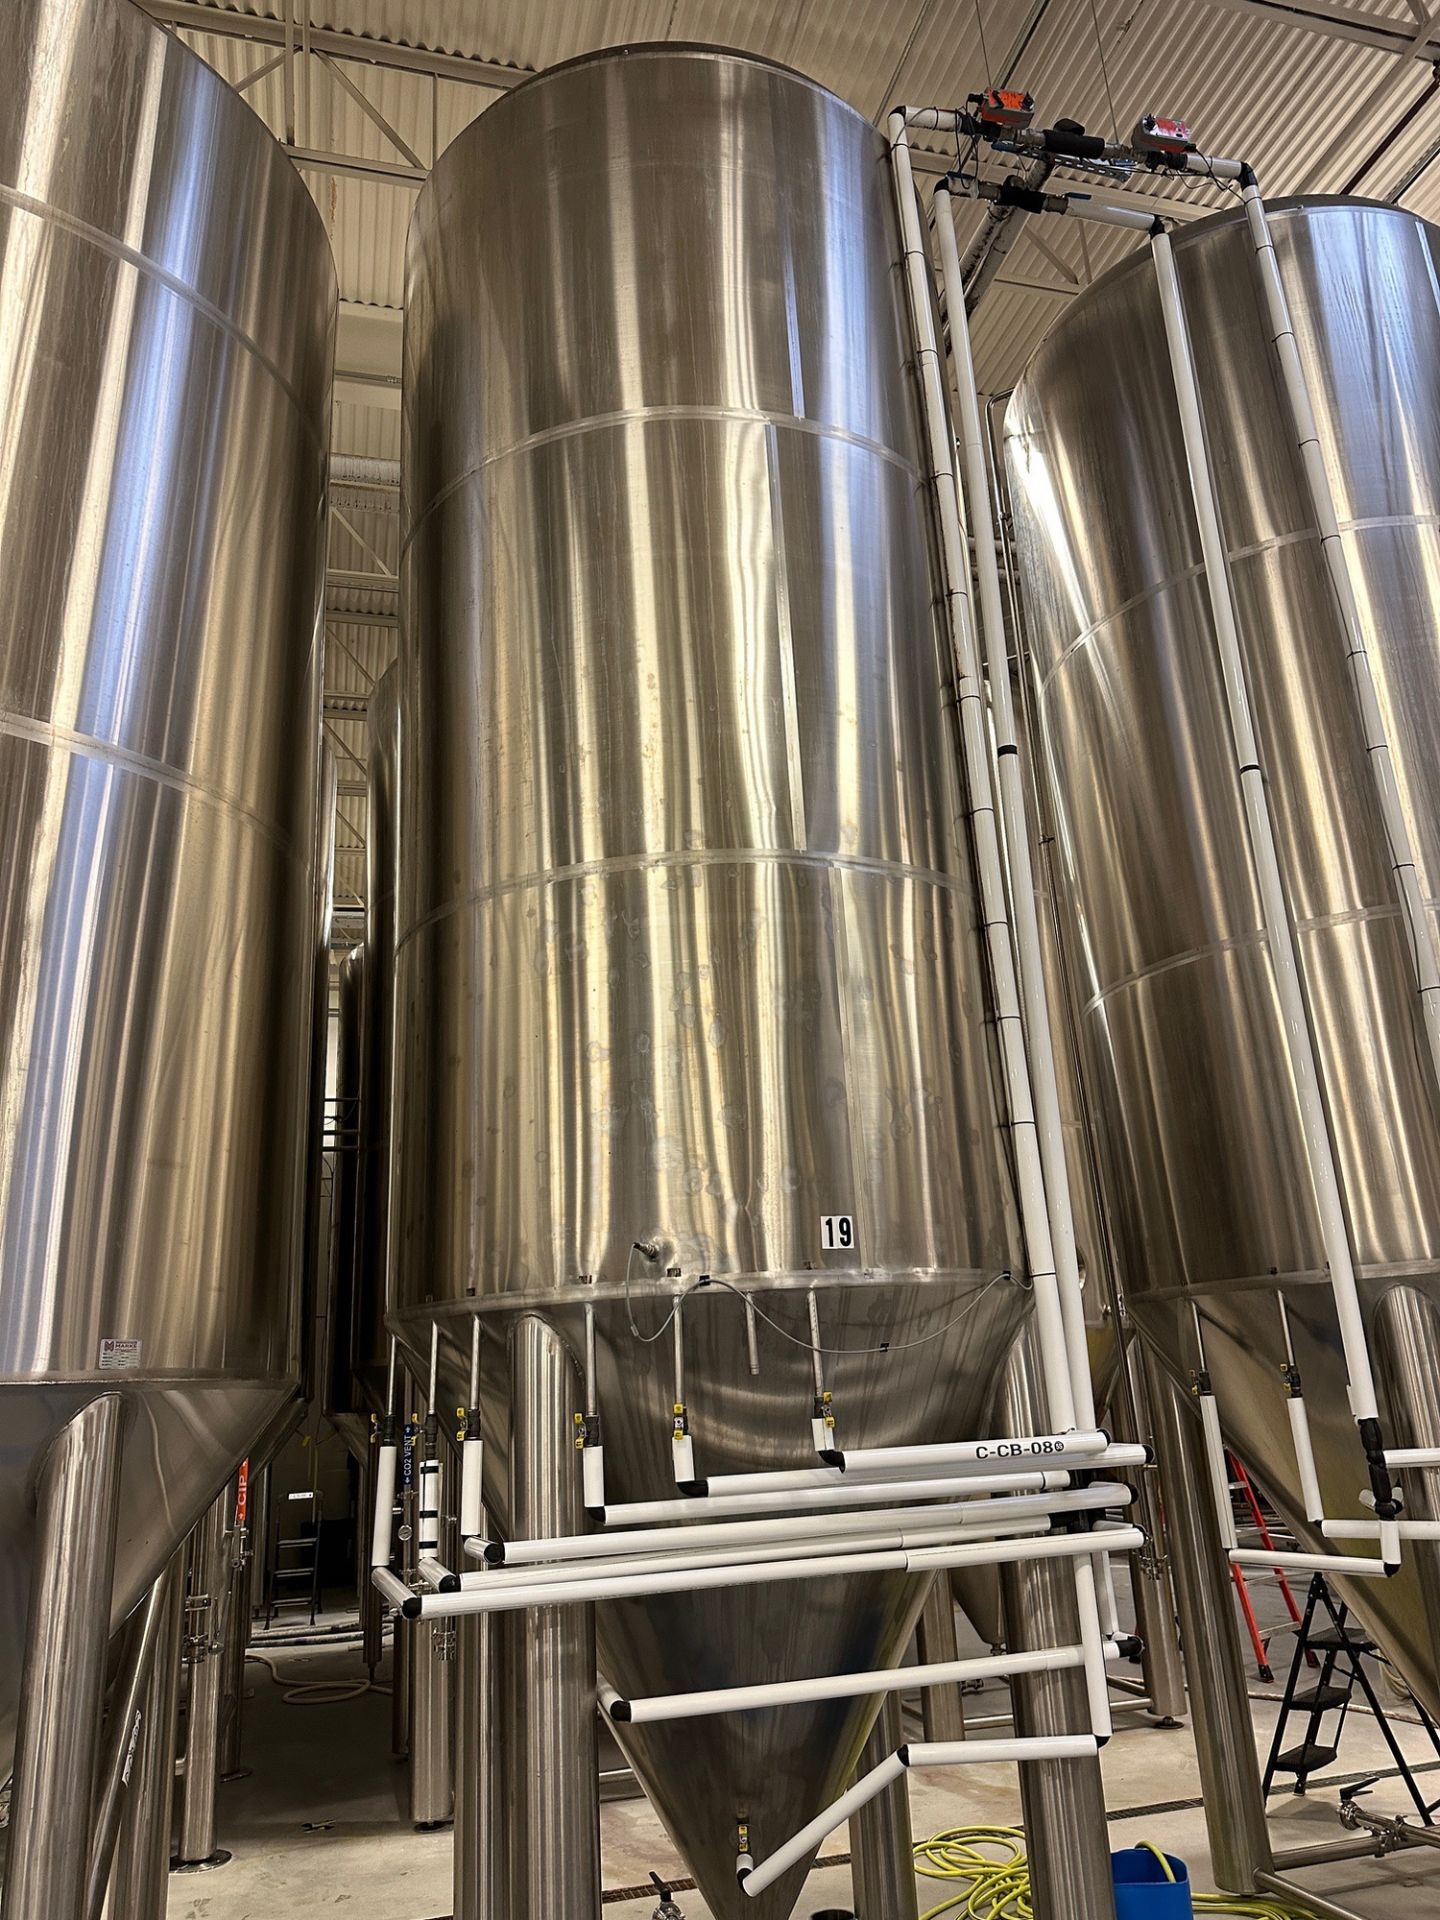 (1 of 2) 2018 Prospero 120 BBL FV / 148.6 BBL or 4,600 Gal Max Capacity Jacketed Stainless Steel FV - Image 4 of 4